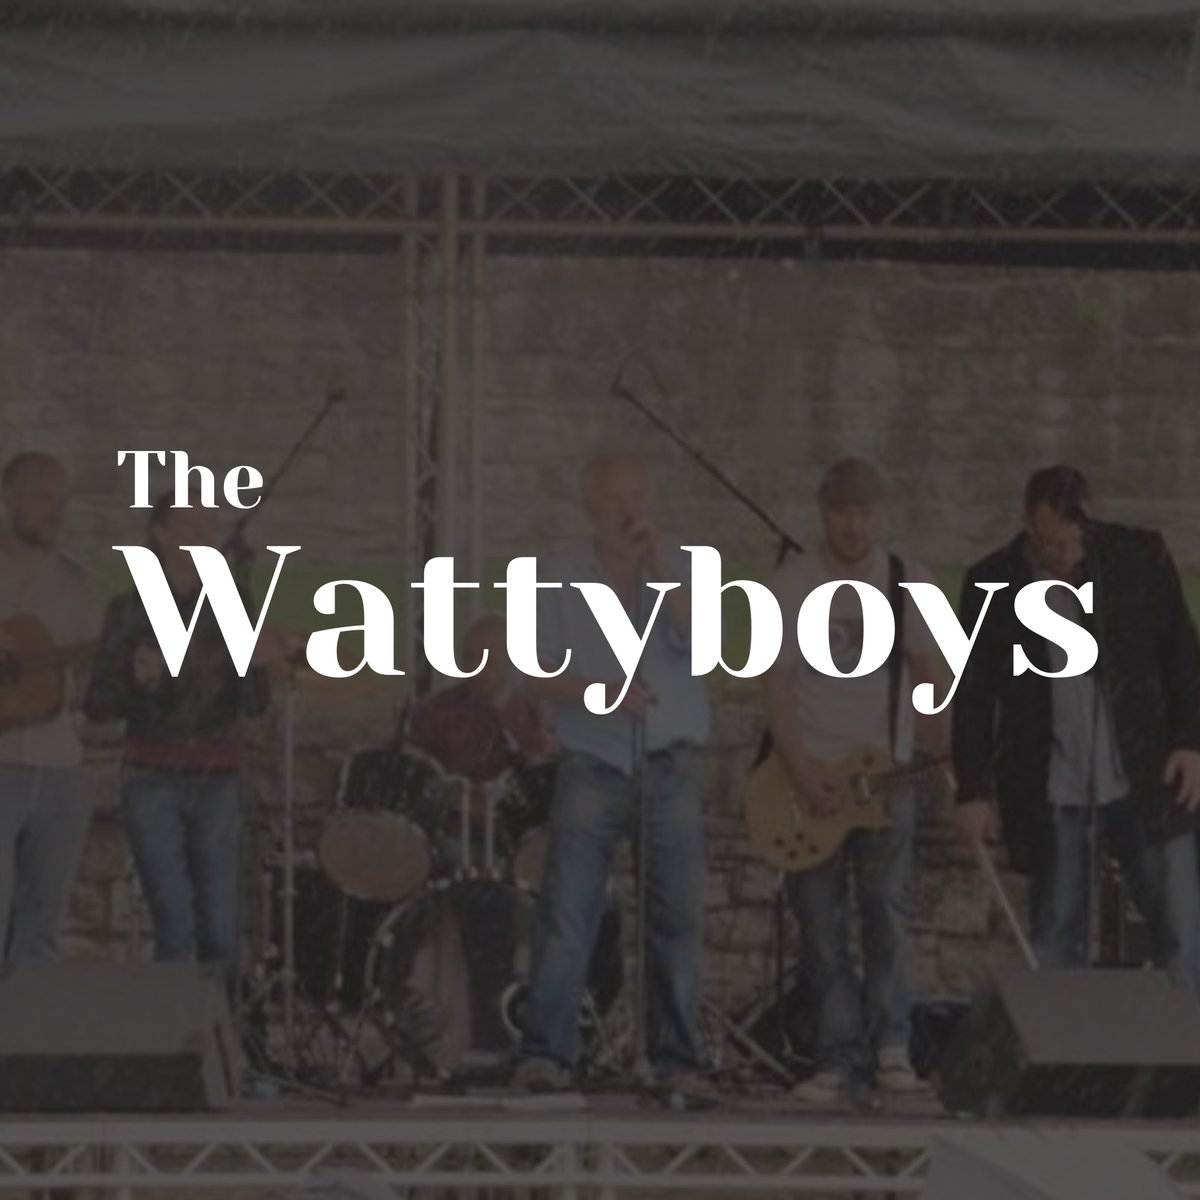 Band announcement 🎸 🎉 The Wattyboys: UK's Folk, Punk, and Rock Fusion! Imagine if The Pogues and Flogging Molly had a musical lovechild – that's The Wattyboys! 🎶 We're thrilled to announce that they'll be taking over the main stage at #MightyDubFest Saturday night at 7 PM!